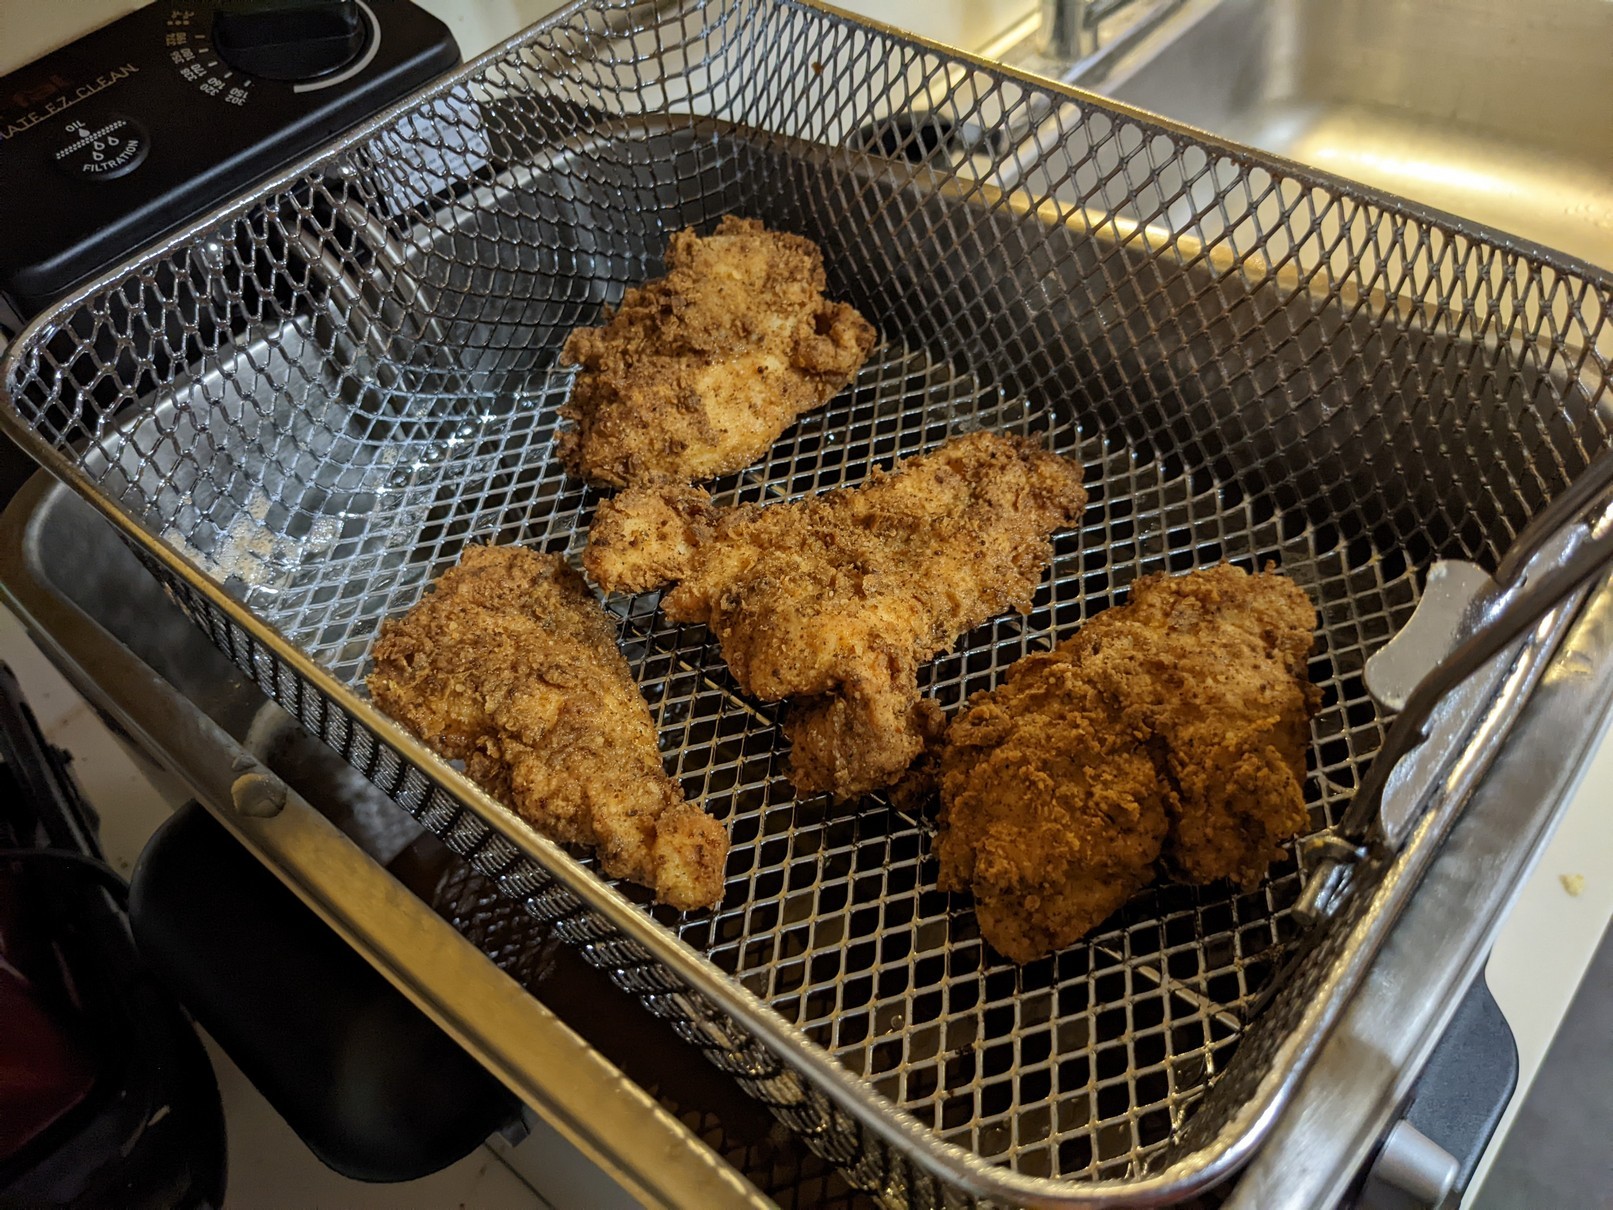 Pieces of fried chicken thighs in a fryer basket, draining from oil.